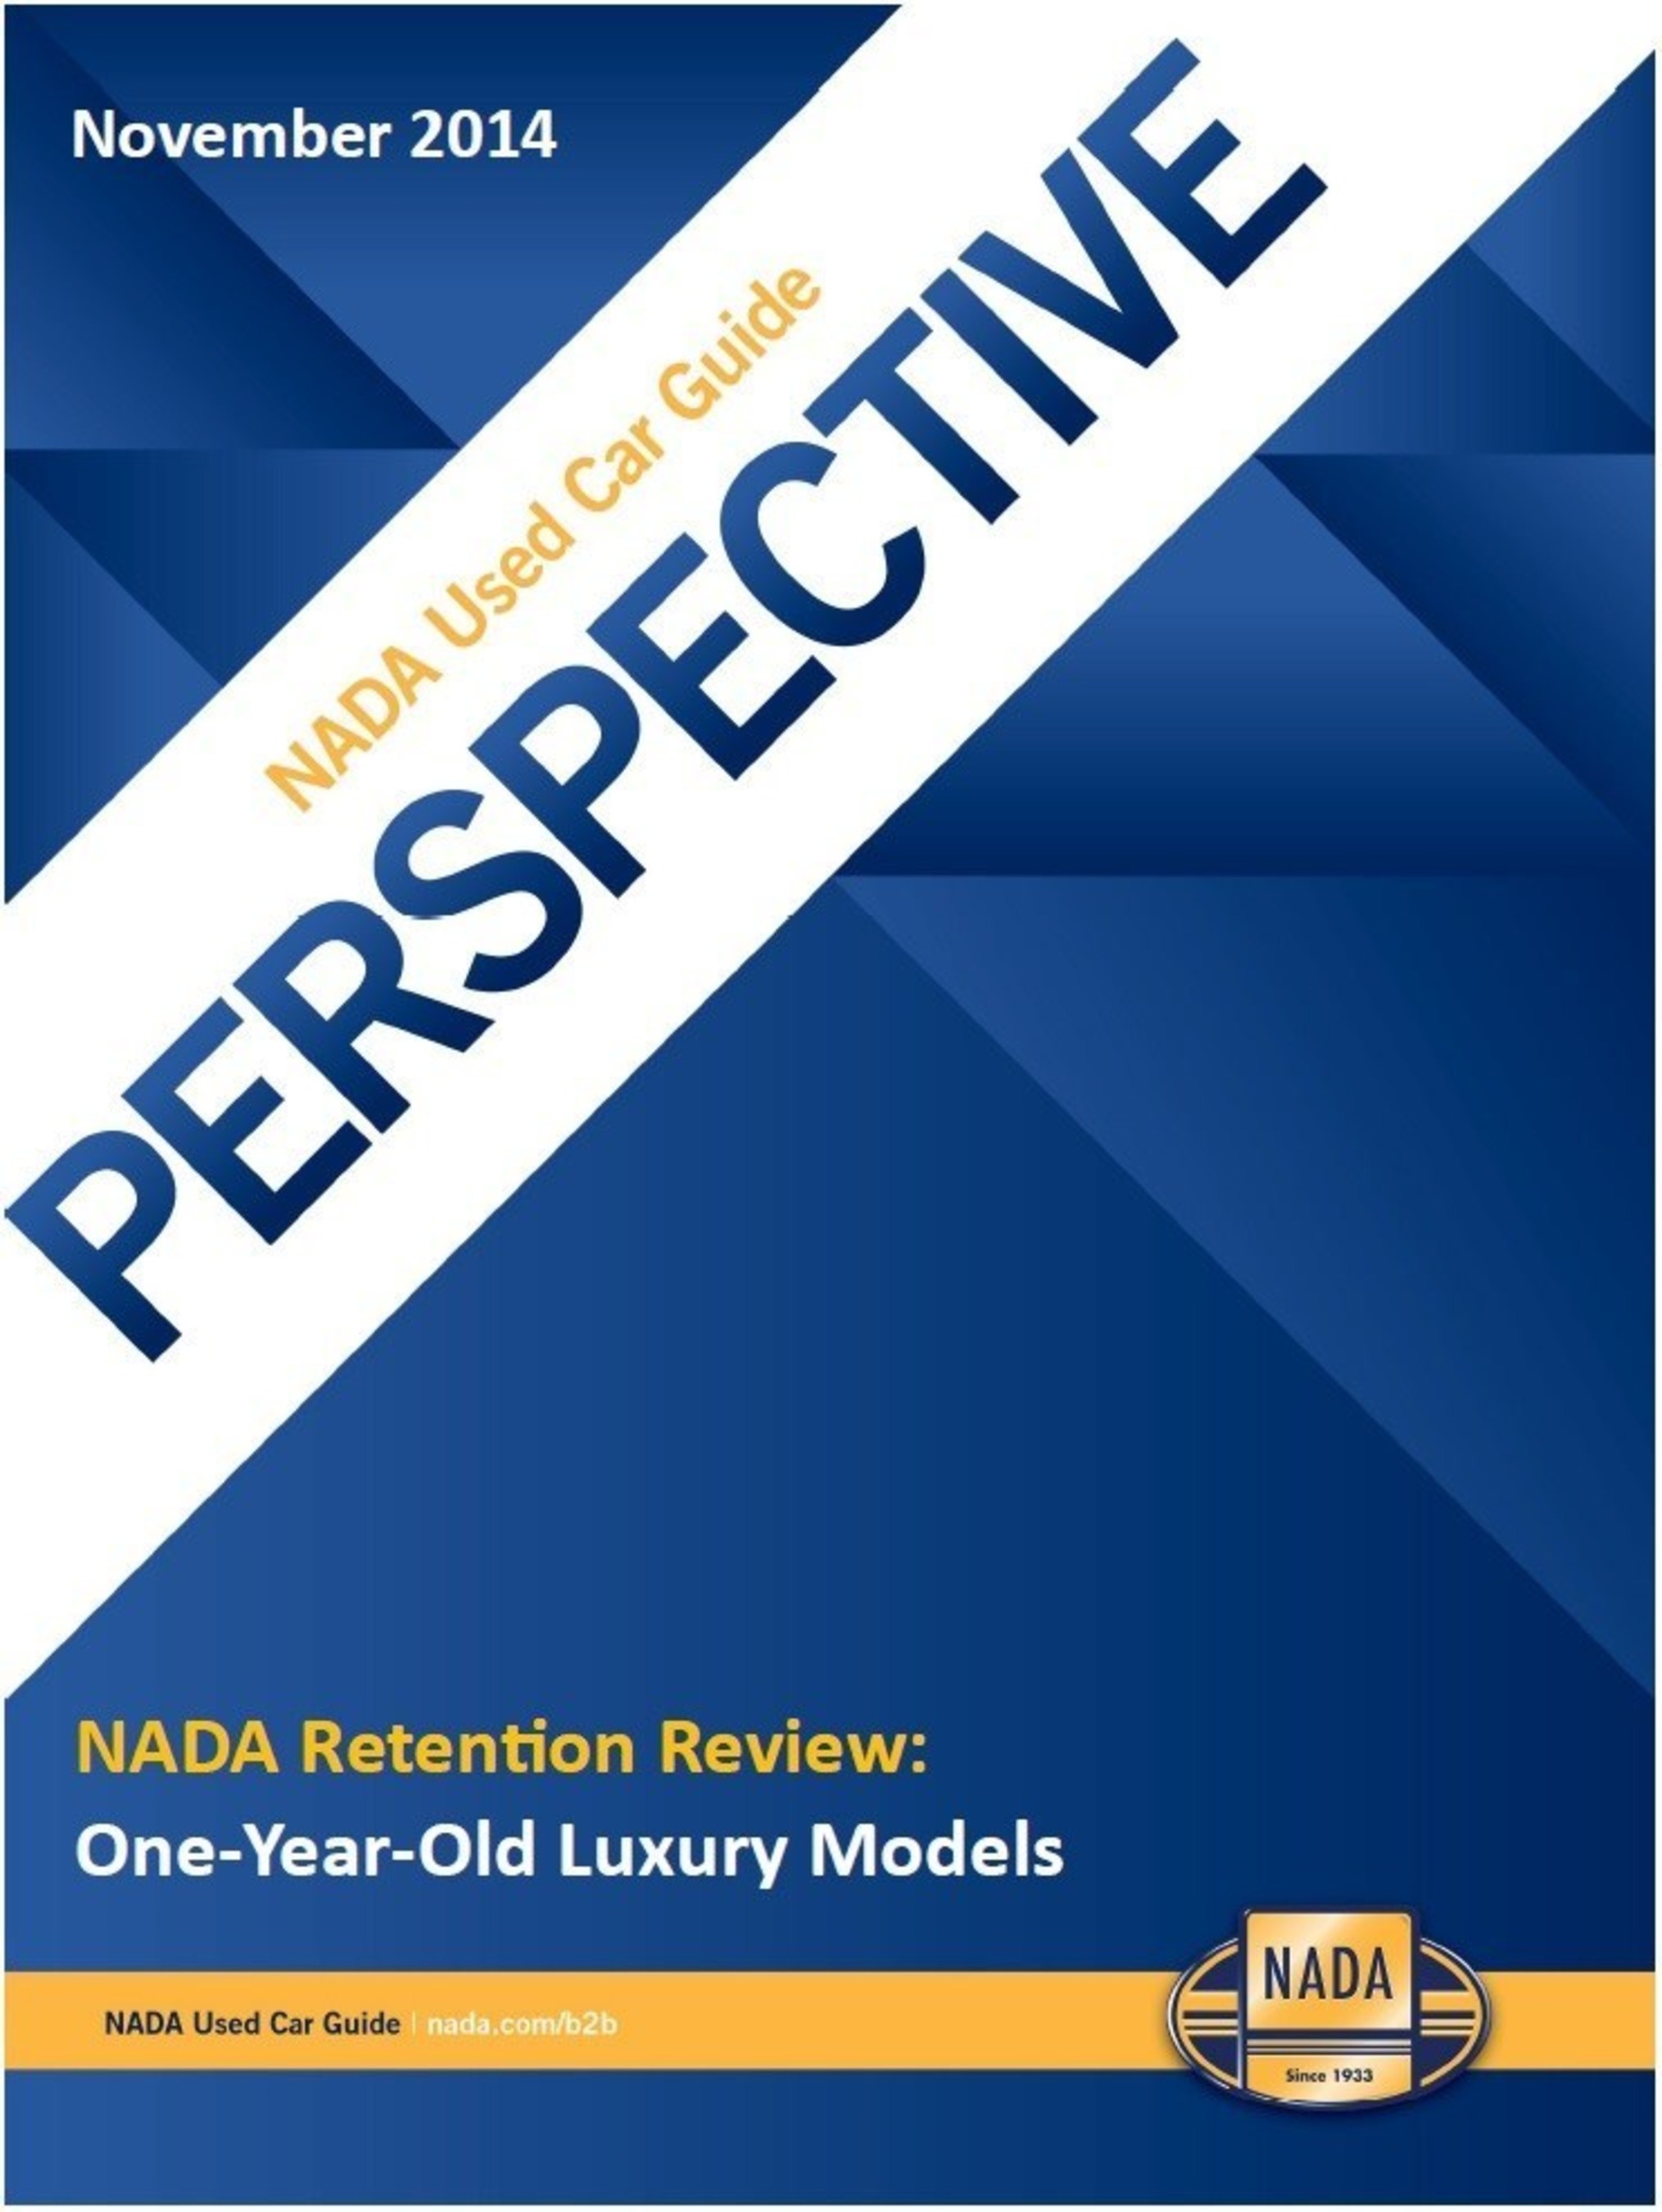 November's edition of Perspective is the first in a two-part series that details the one-year retention performance of all-new or heavily revised luxury models. Mainstream models will be covered in December's edition of Perspective.